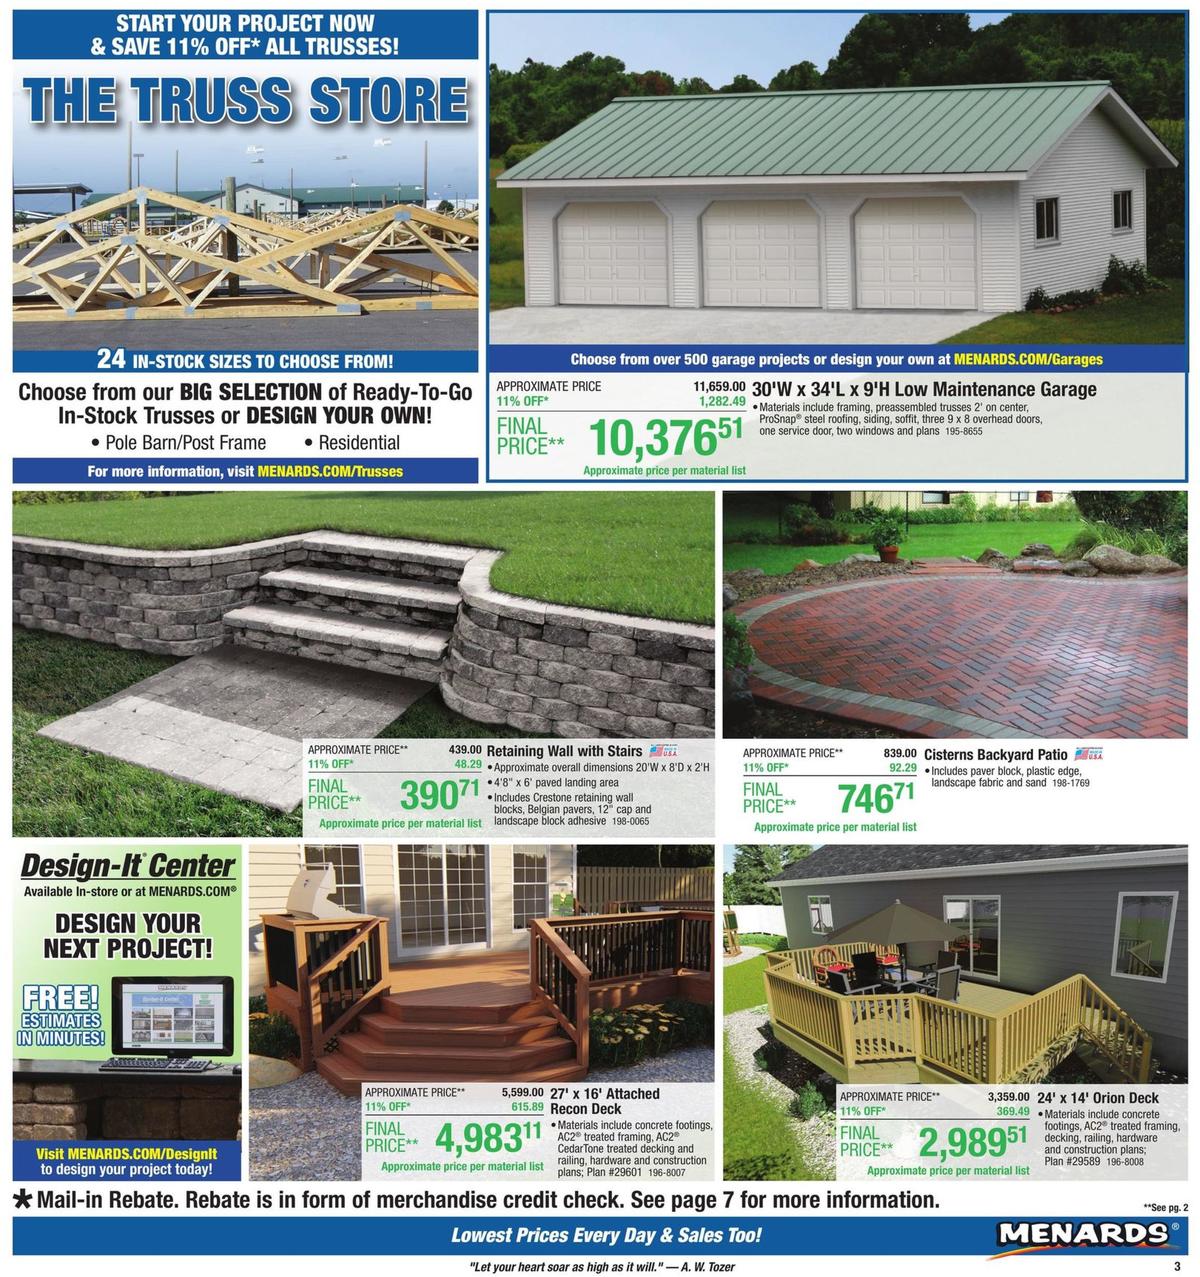 menards-11-rebate-sale-weekly-ads-special-buys-for-august-4-page-5